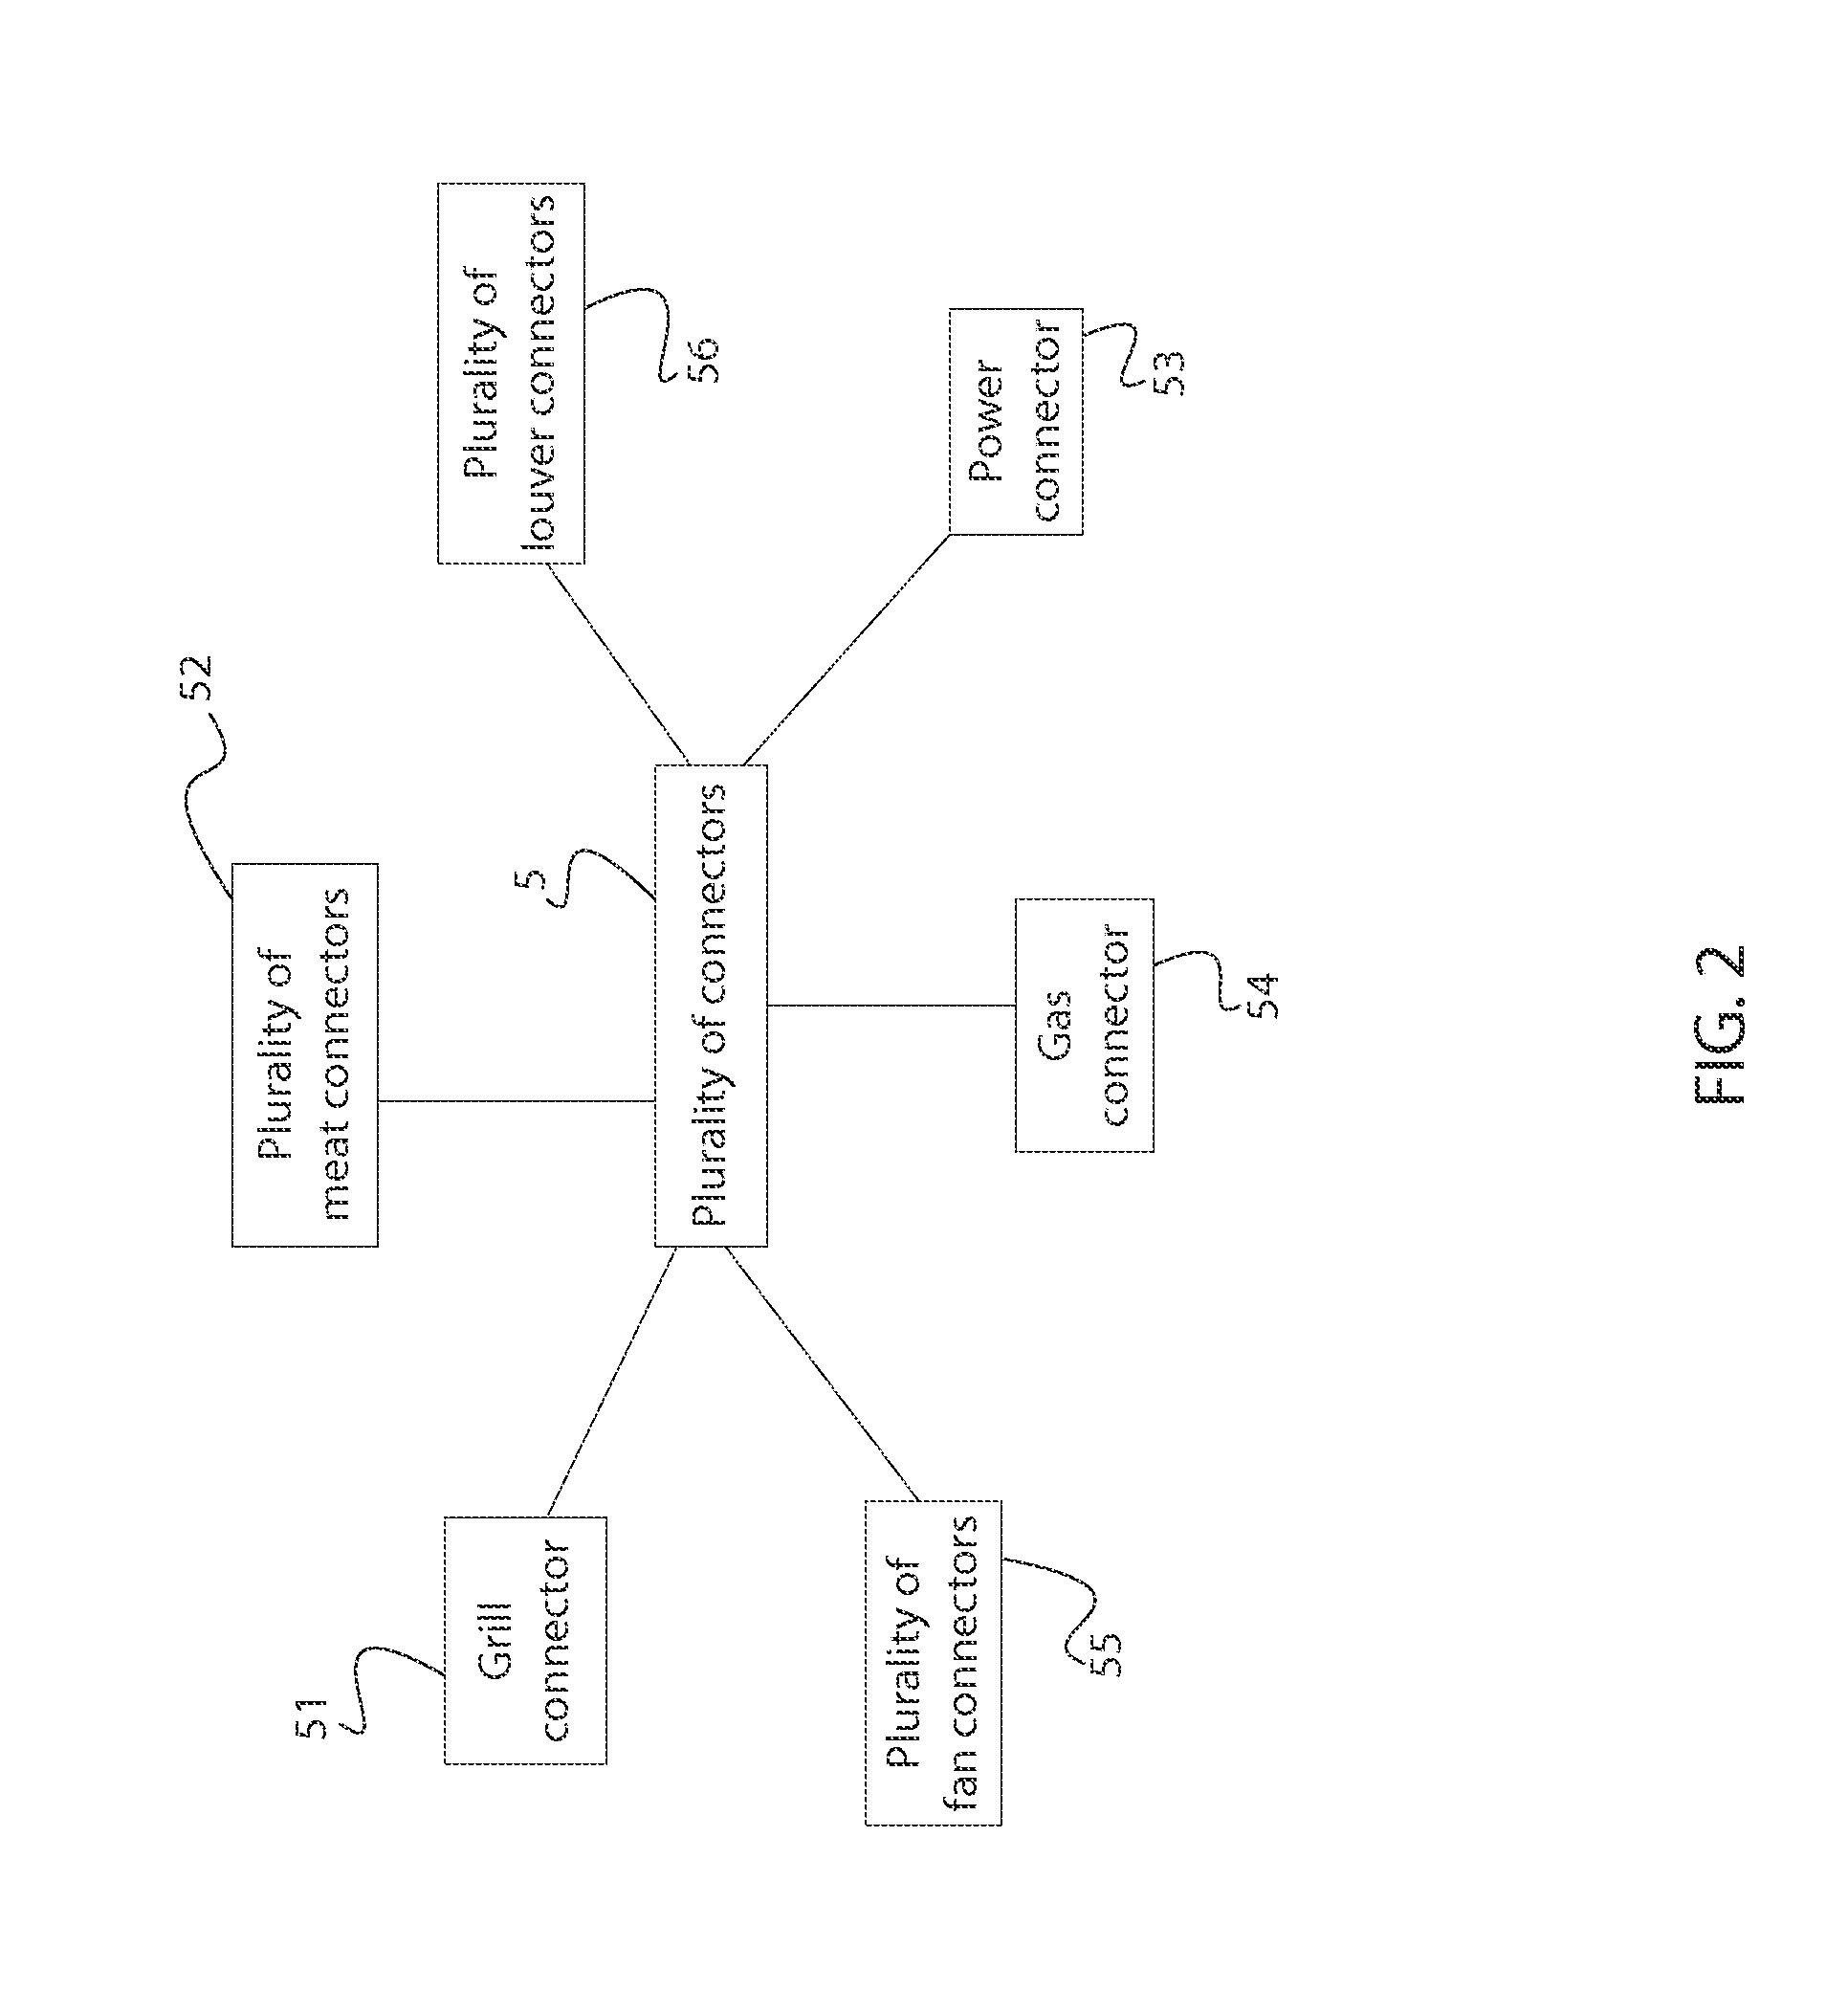 Device to remotely control an outdoor grill or an indoor oven with a web-enabled computing device